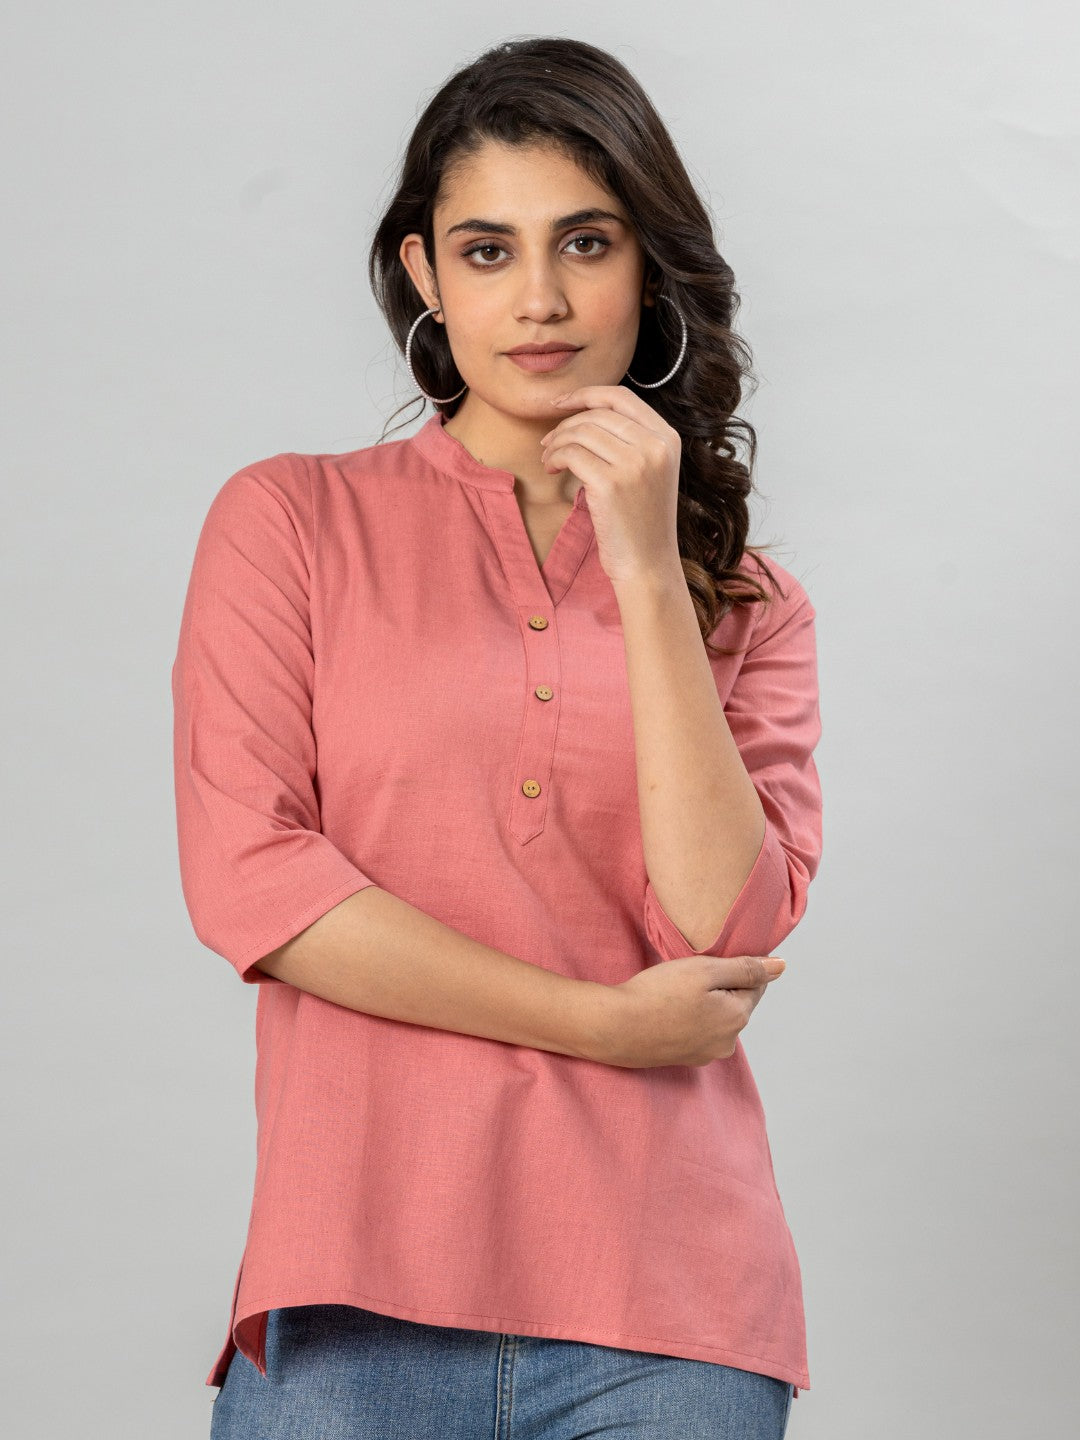 Solid Cotton Flax Women Top - Peach